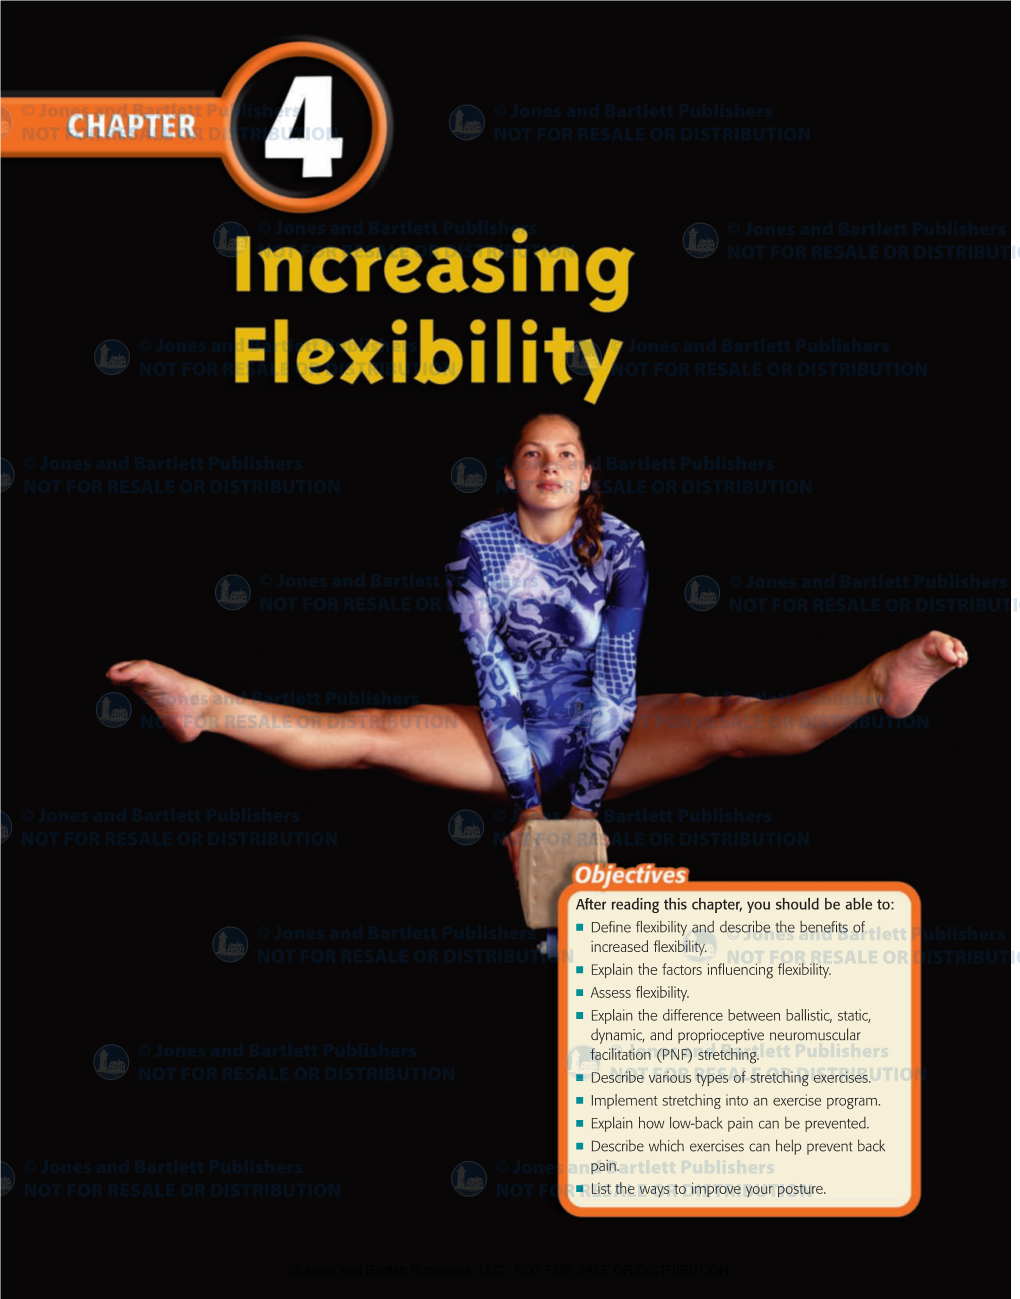 Define Flexibility and Describe the Benefits of Increased Flexibility. ■ Explain the Factors Influencing Flexibility